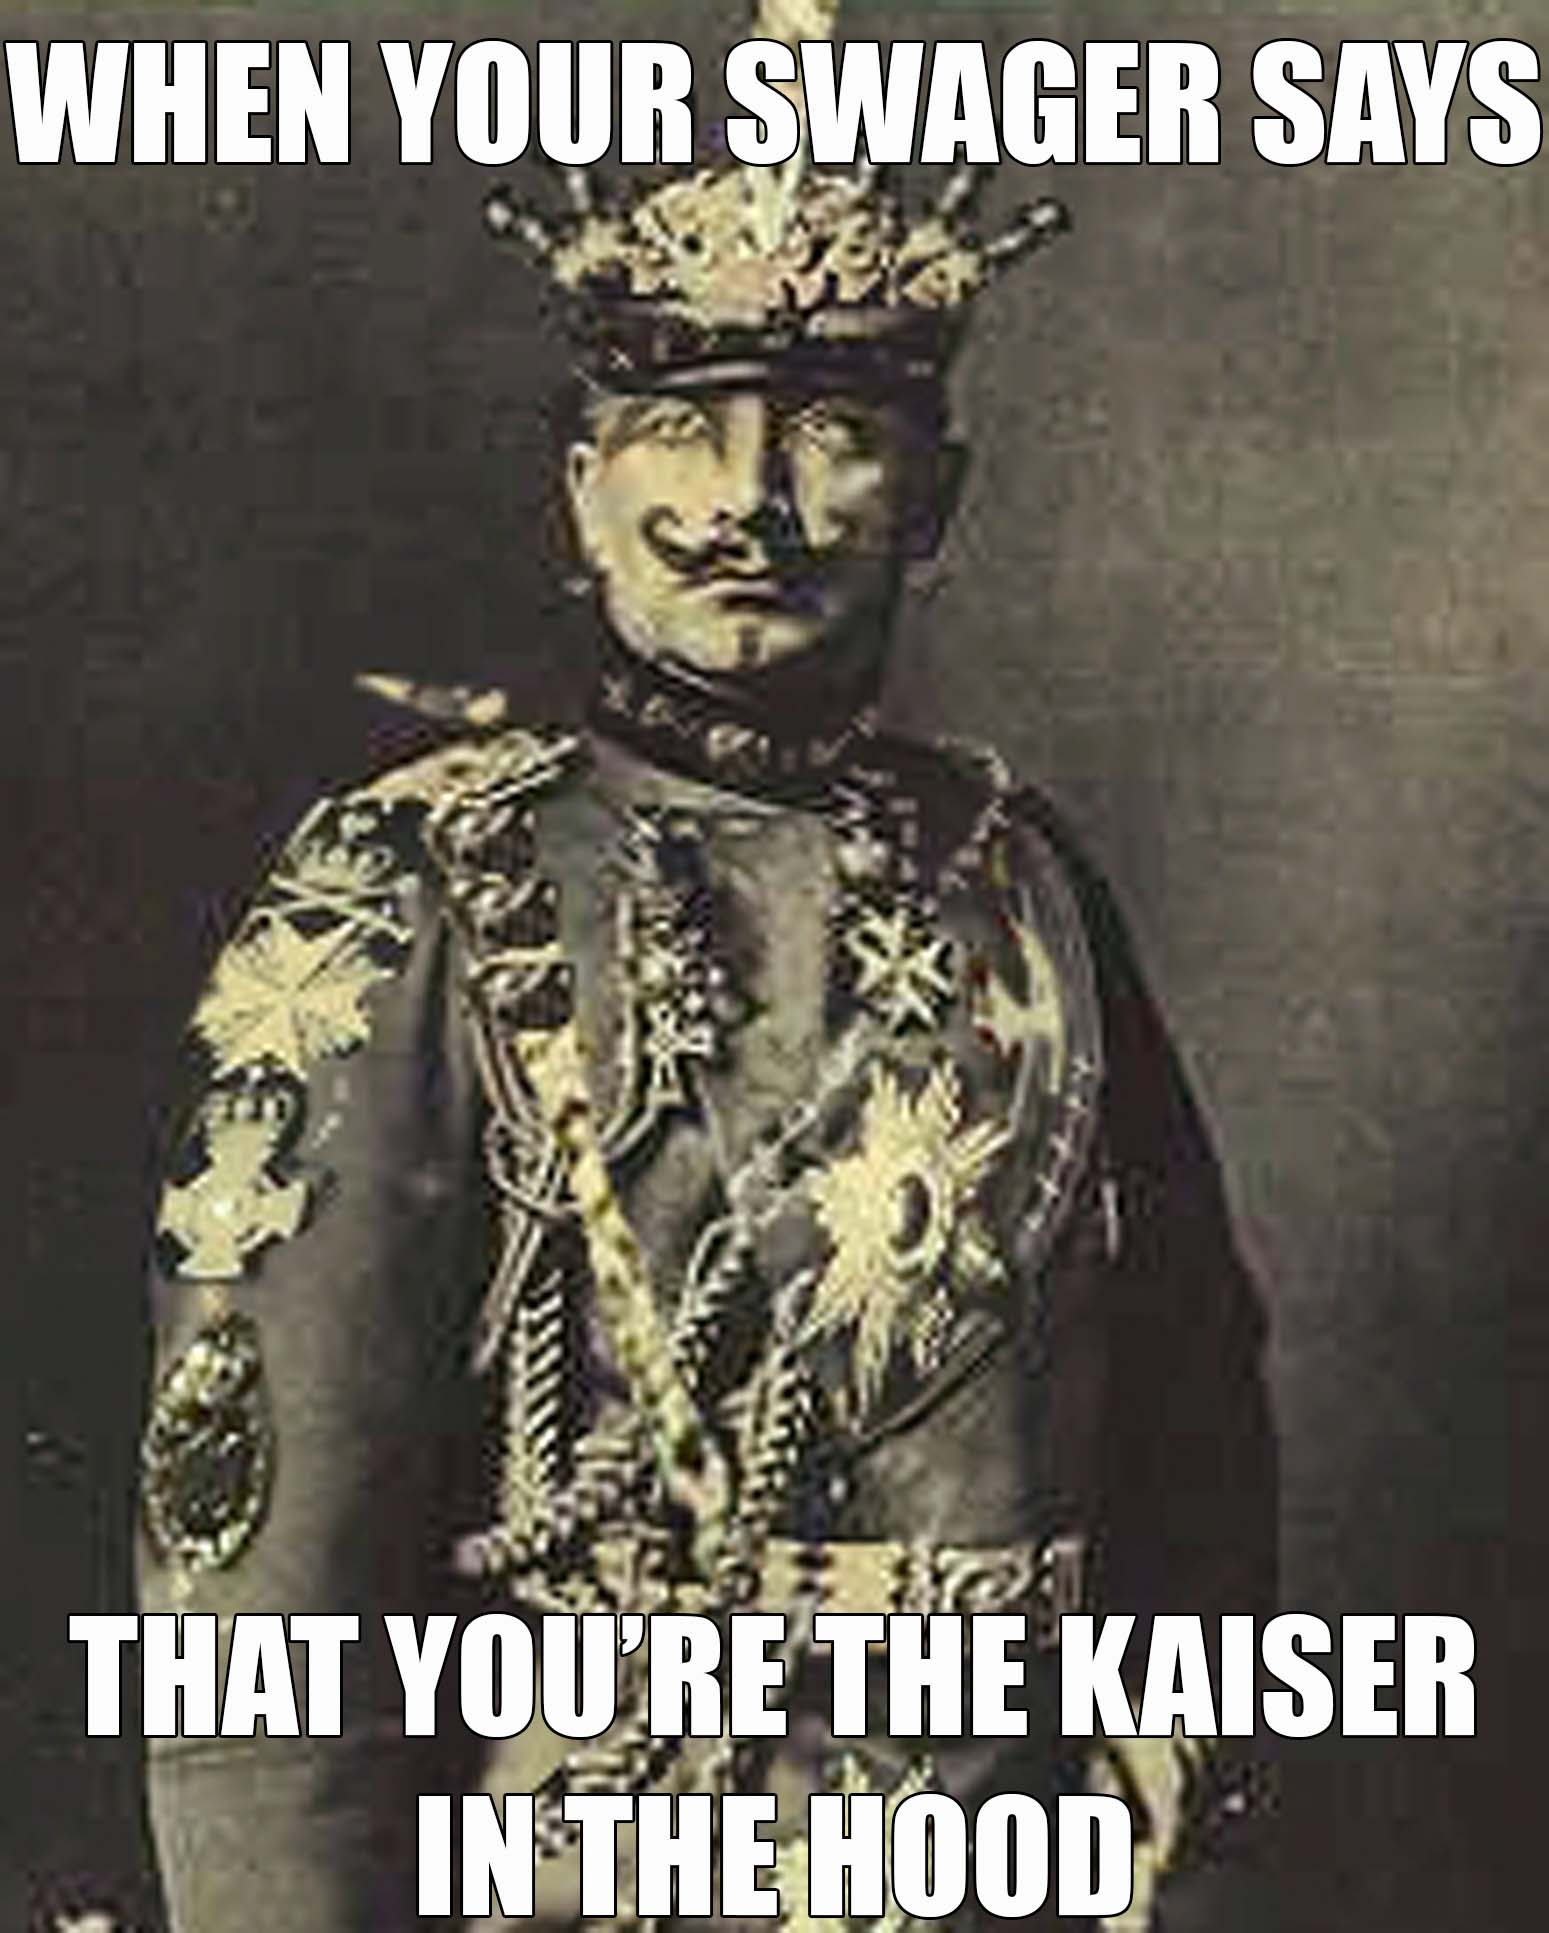 getting compliments as a proud prussian